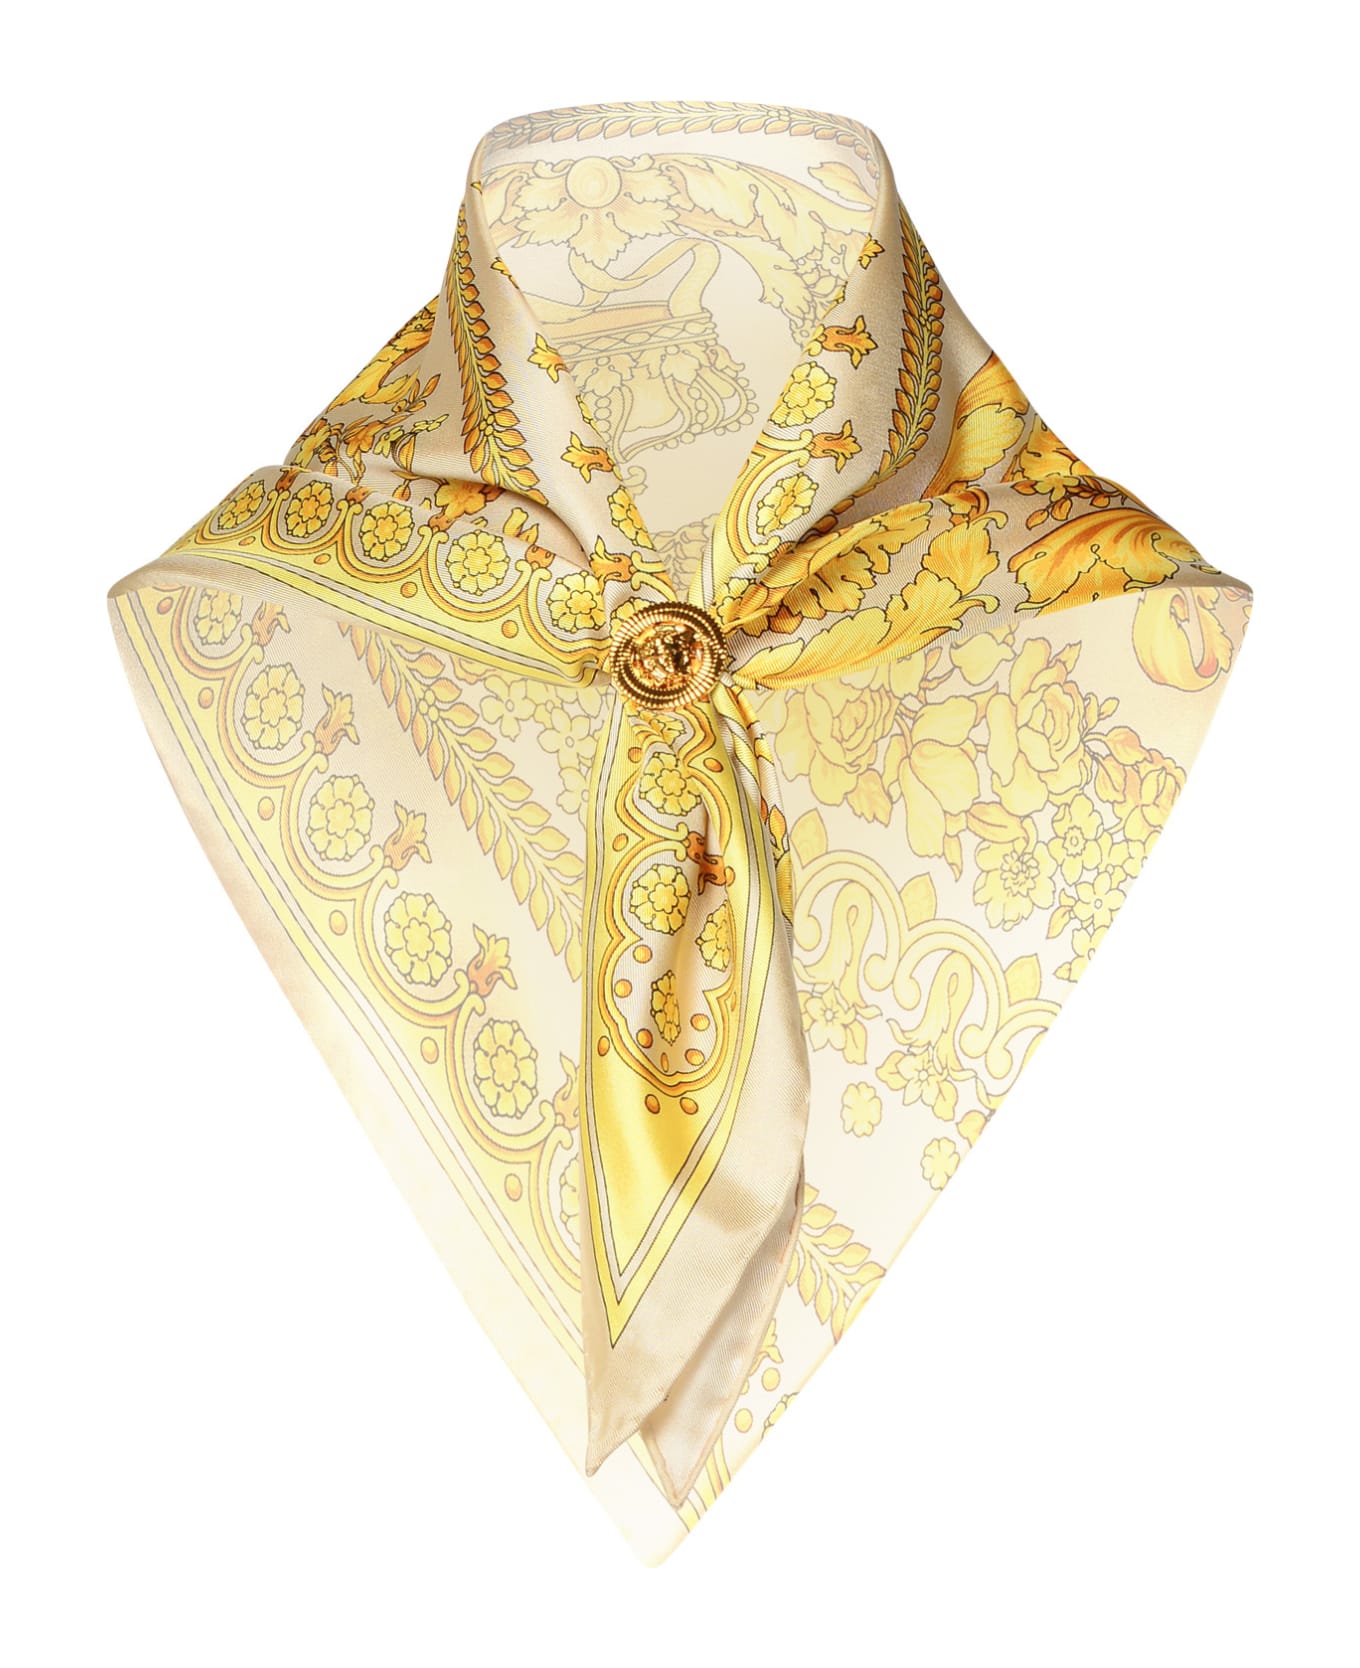 Versace Two-tone Silk Scarf - Gold スカーフ